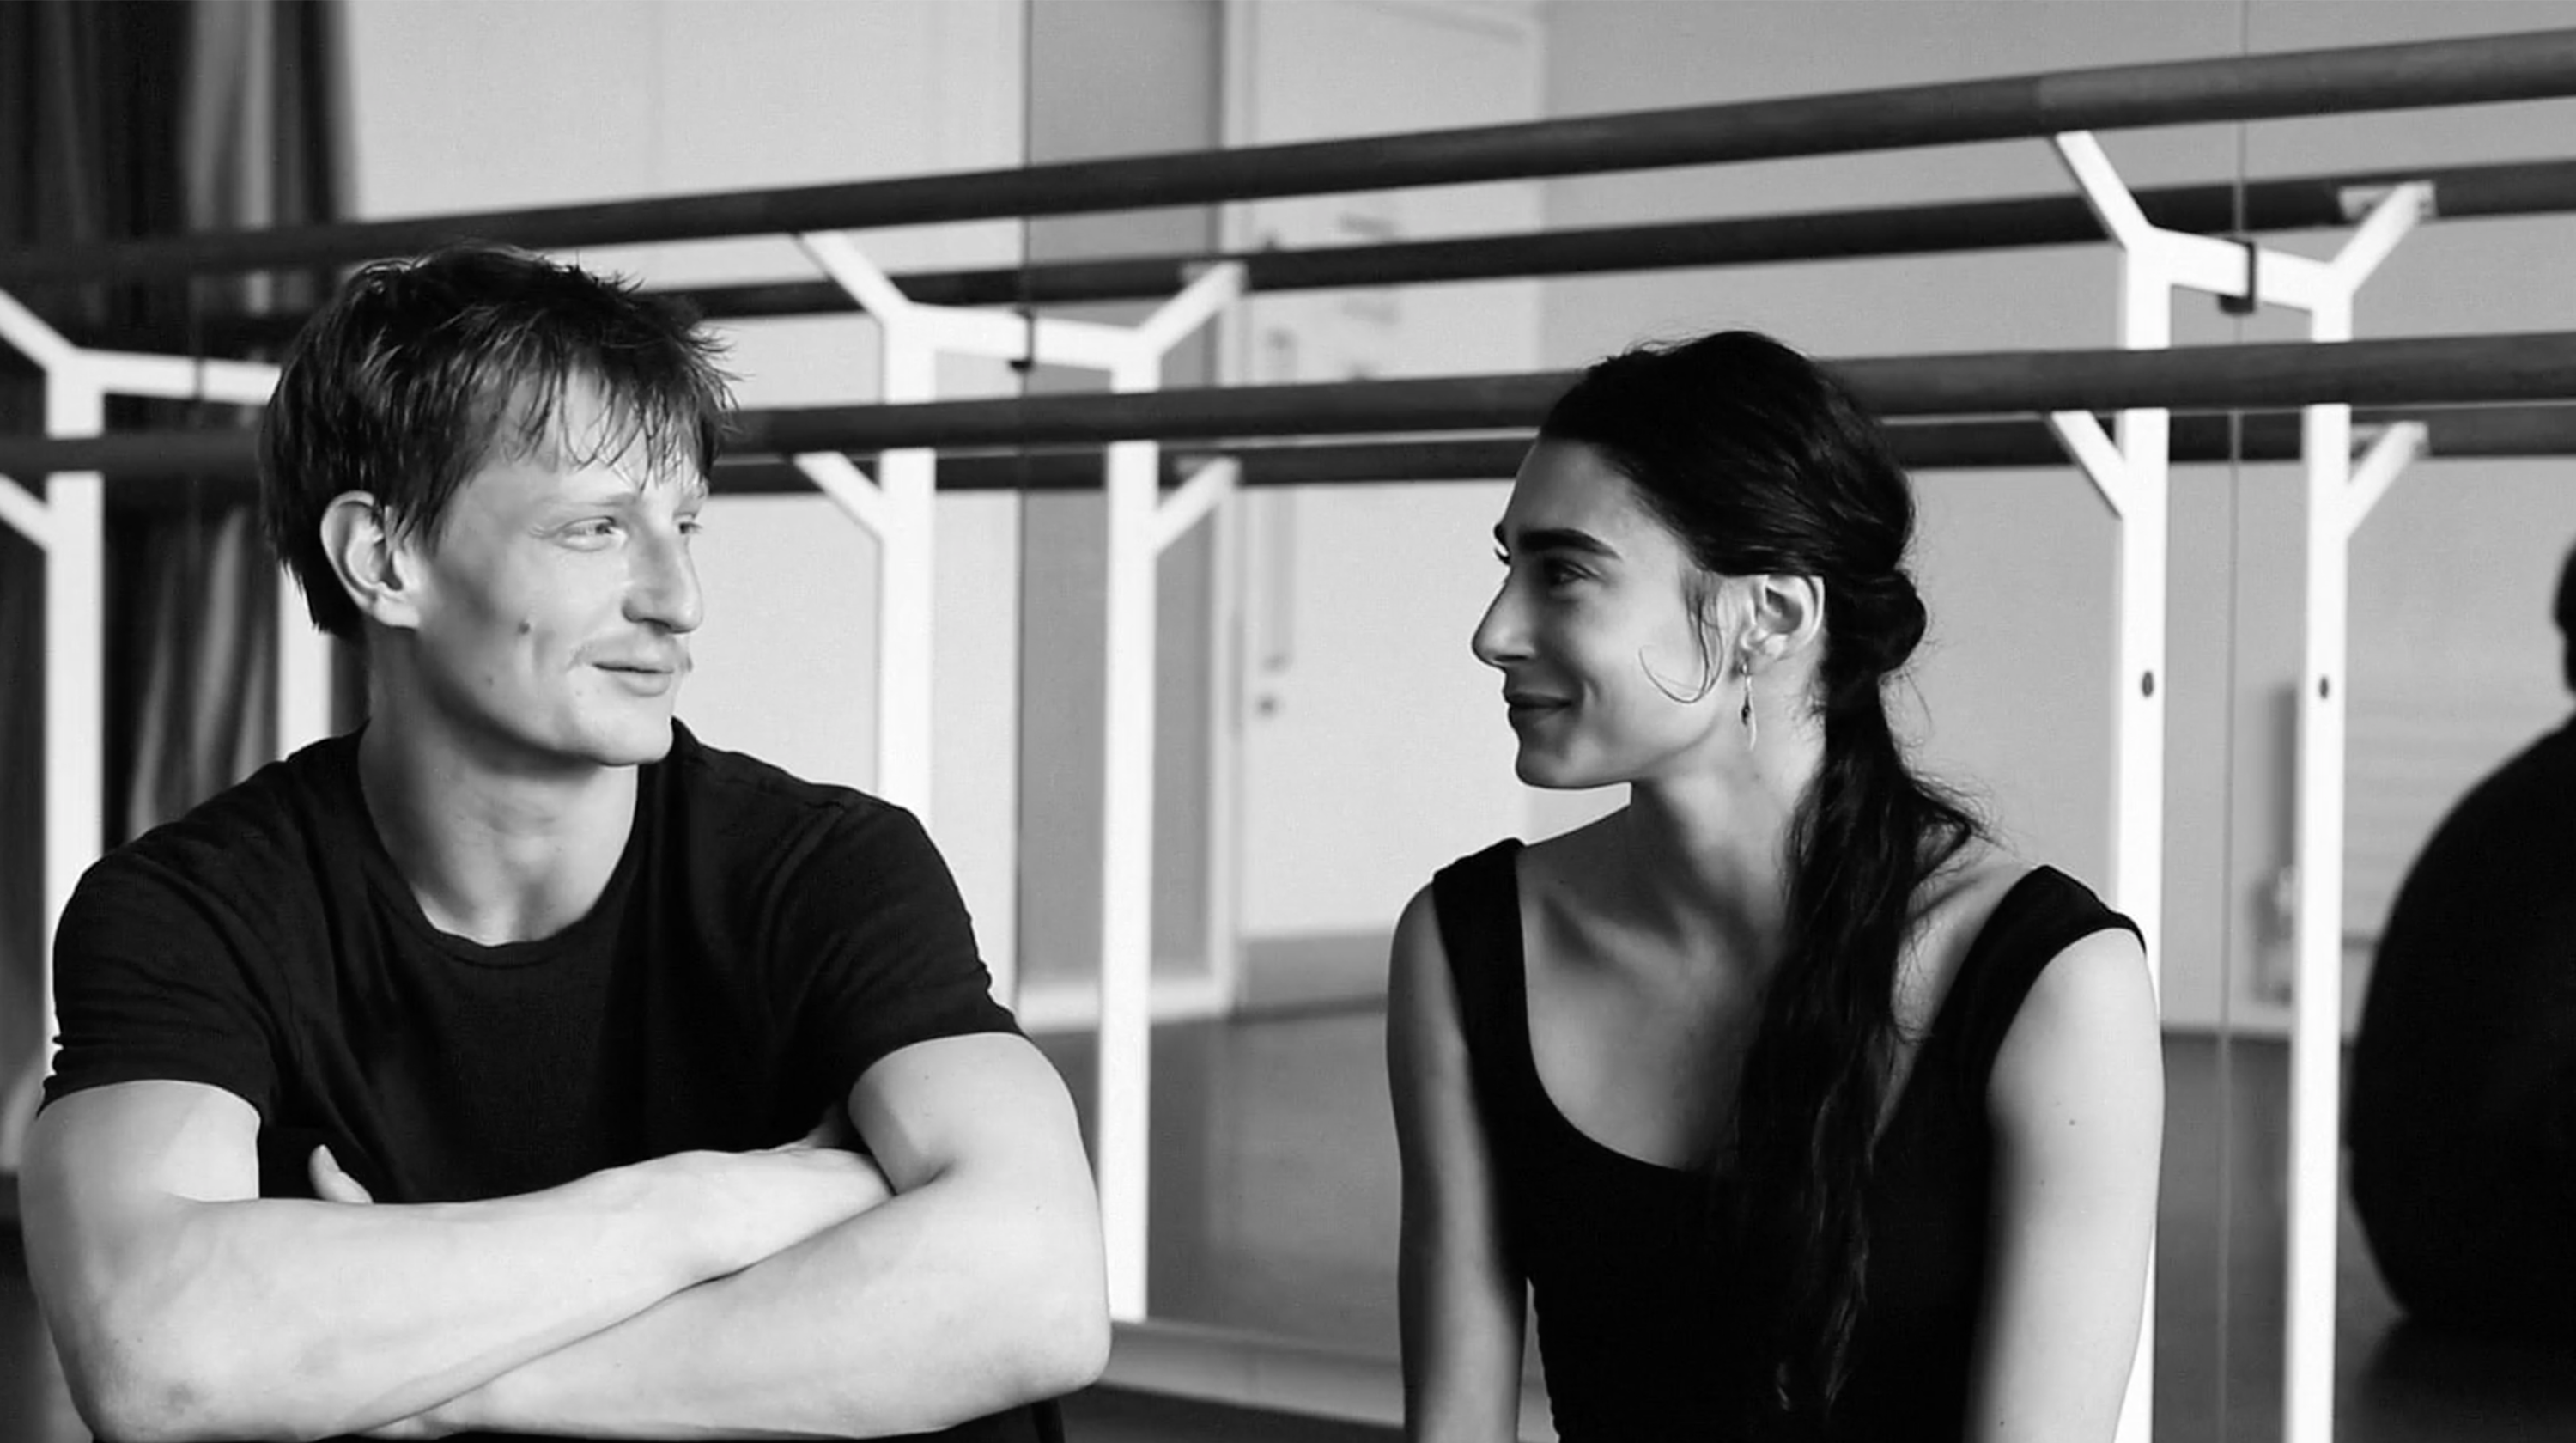 A male and a female dancer sitting in the studio talking to each other and sharing their experience during a production rehearsal